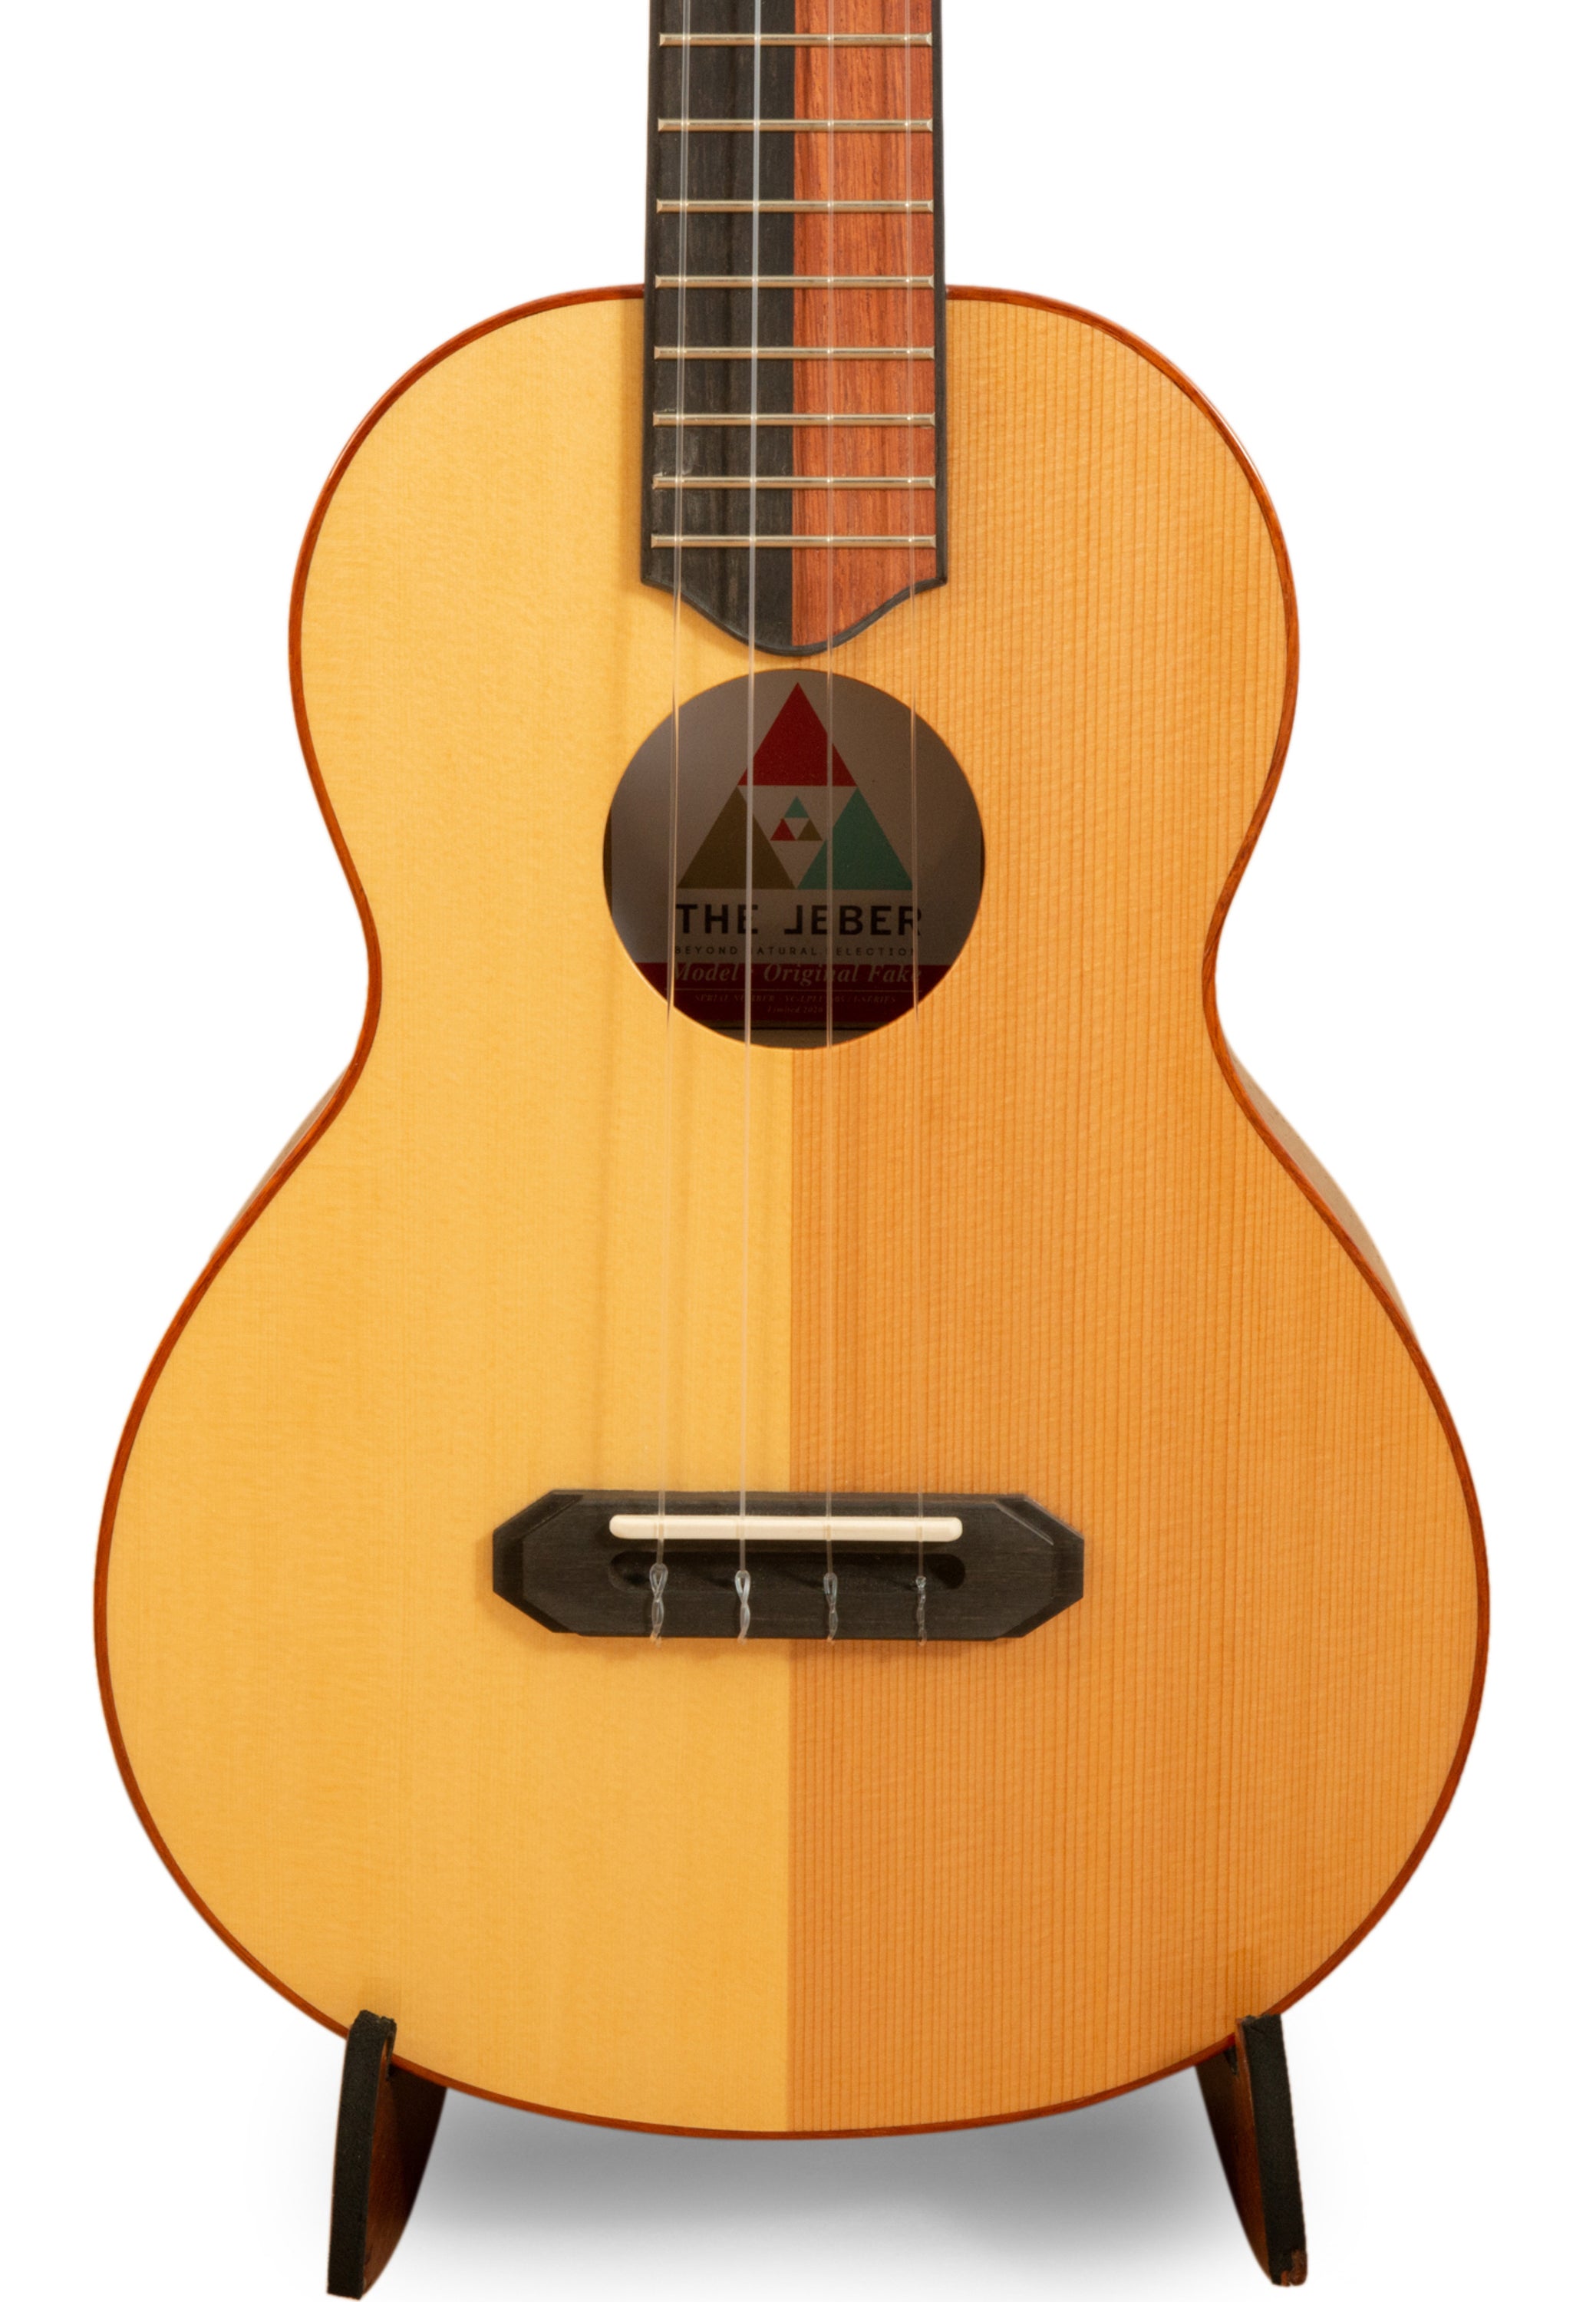 Rebel New Particle Tenor Ukulele Solid Cedar/Spruce "Daito" ONLY 10 MADE